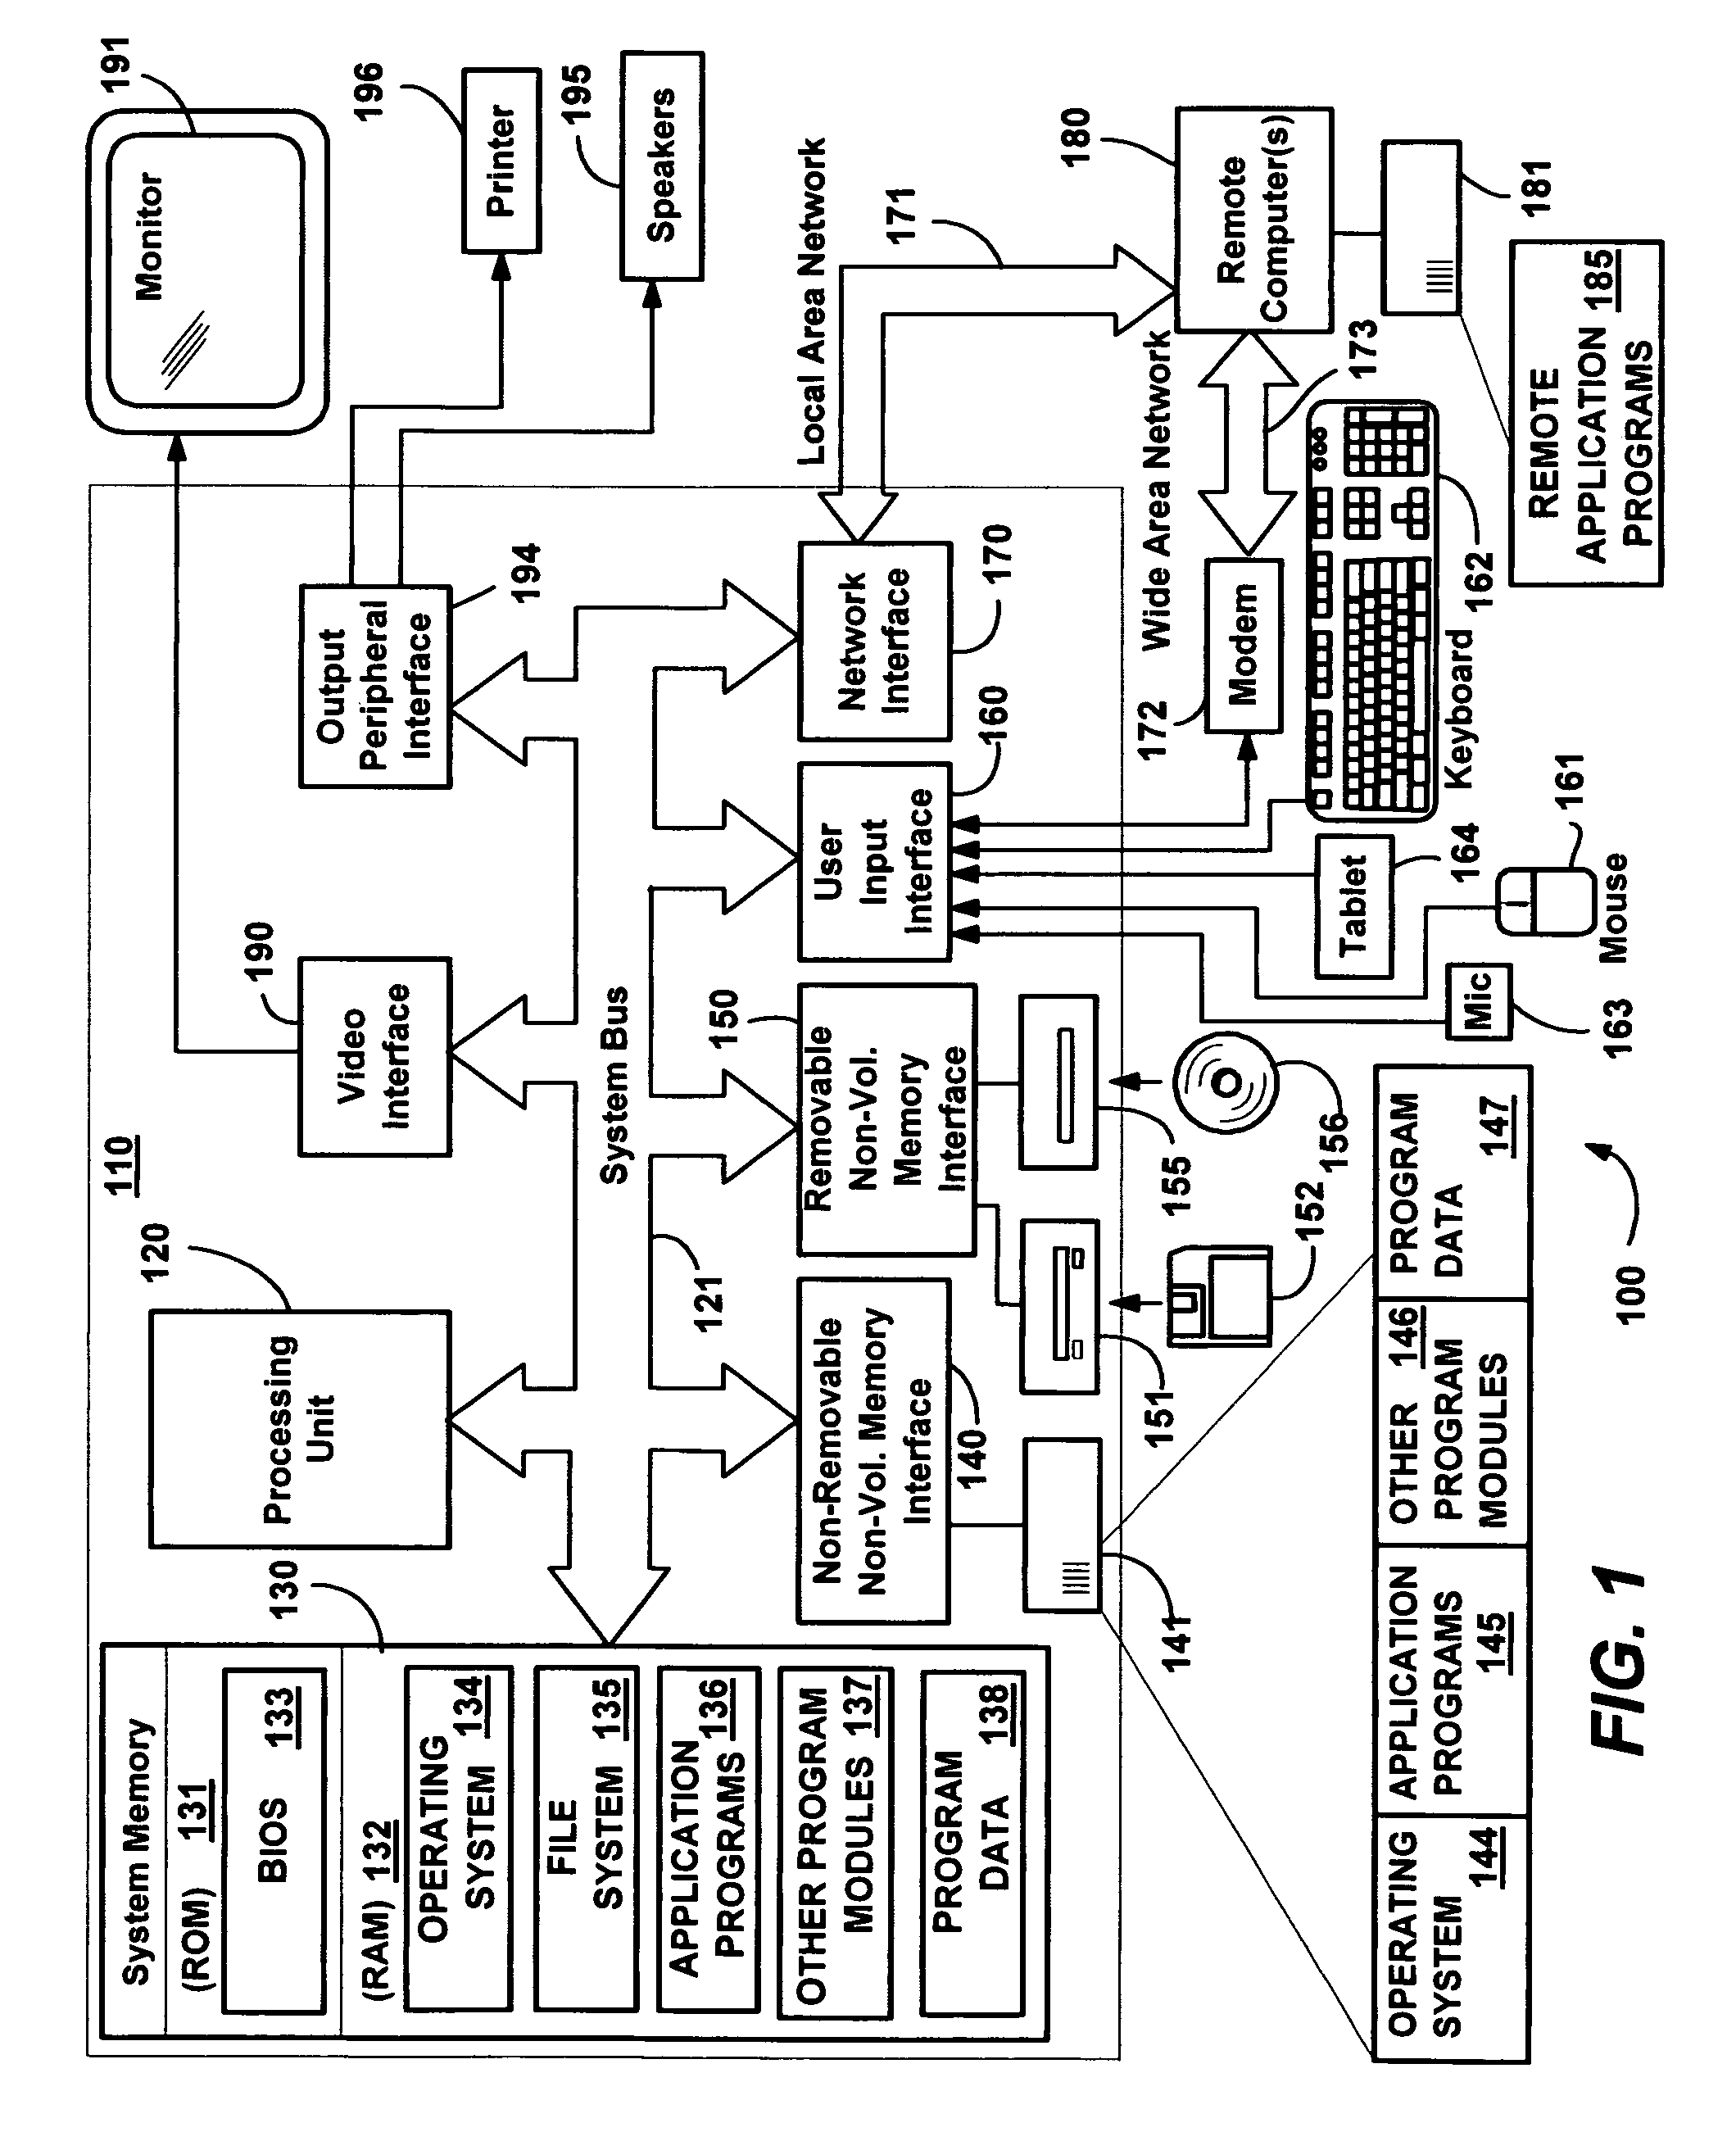 System and method of pipeline data access to remote data